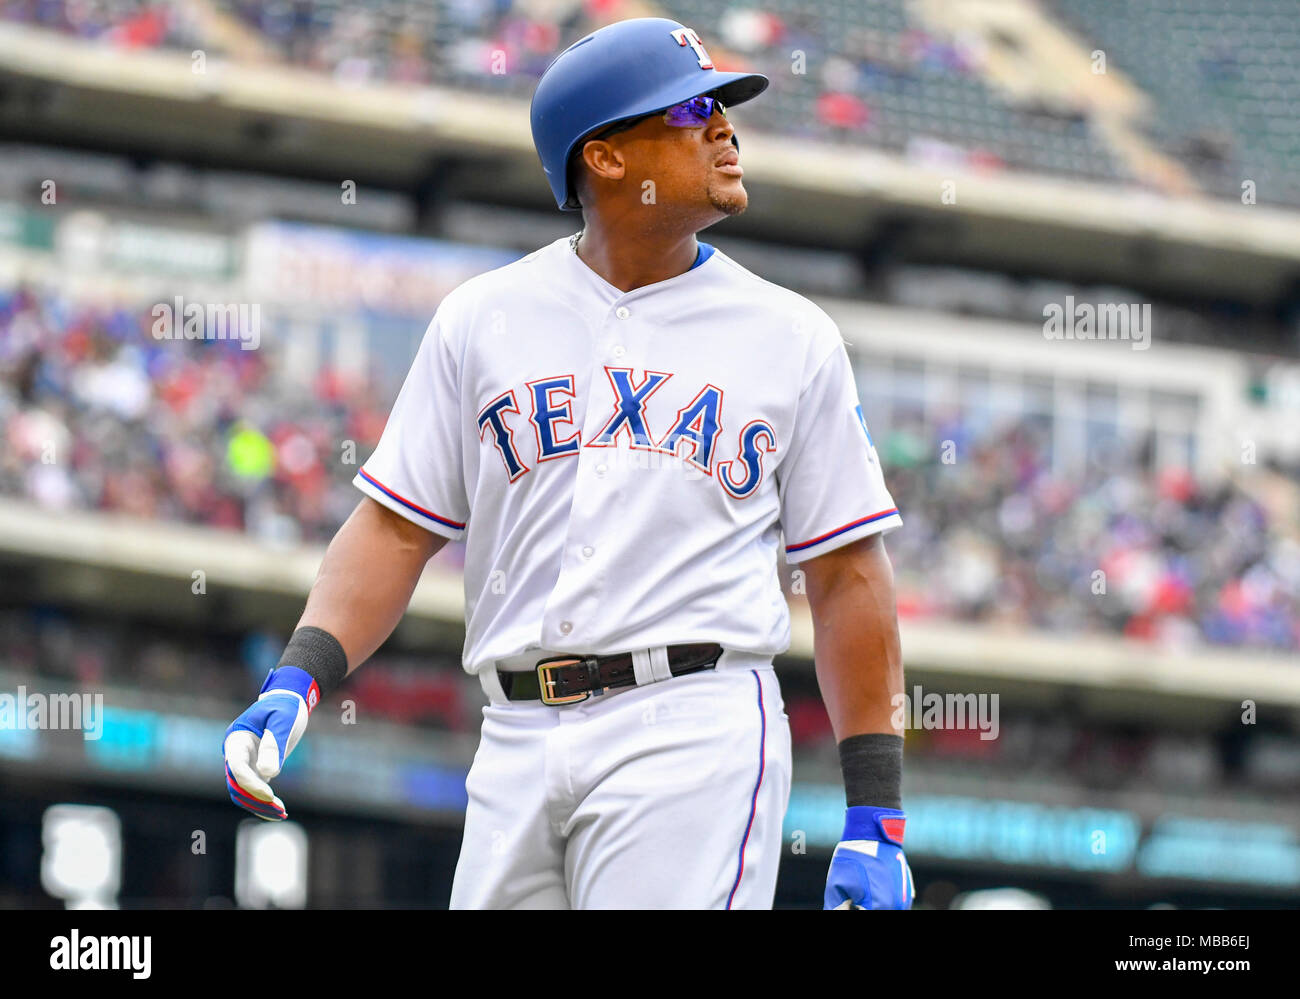 Apr 08, 2018: Texas Rangers third baseman Adrian Beltre #29 during an MLB  game between the Toronto Blue Jays and the Texas Rangers at Globe Life Park  in Arlington, TX Toronto defeated